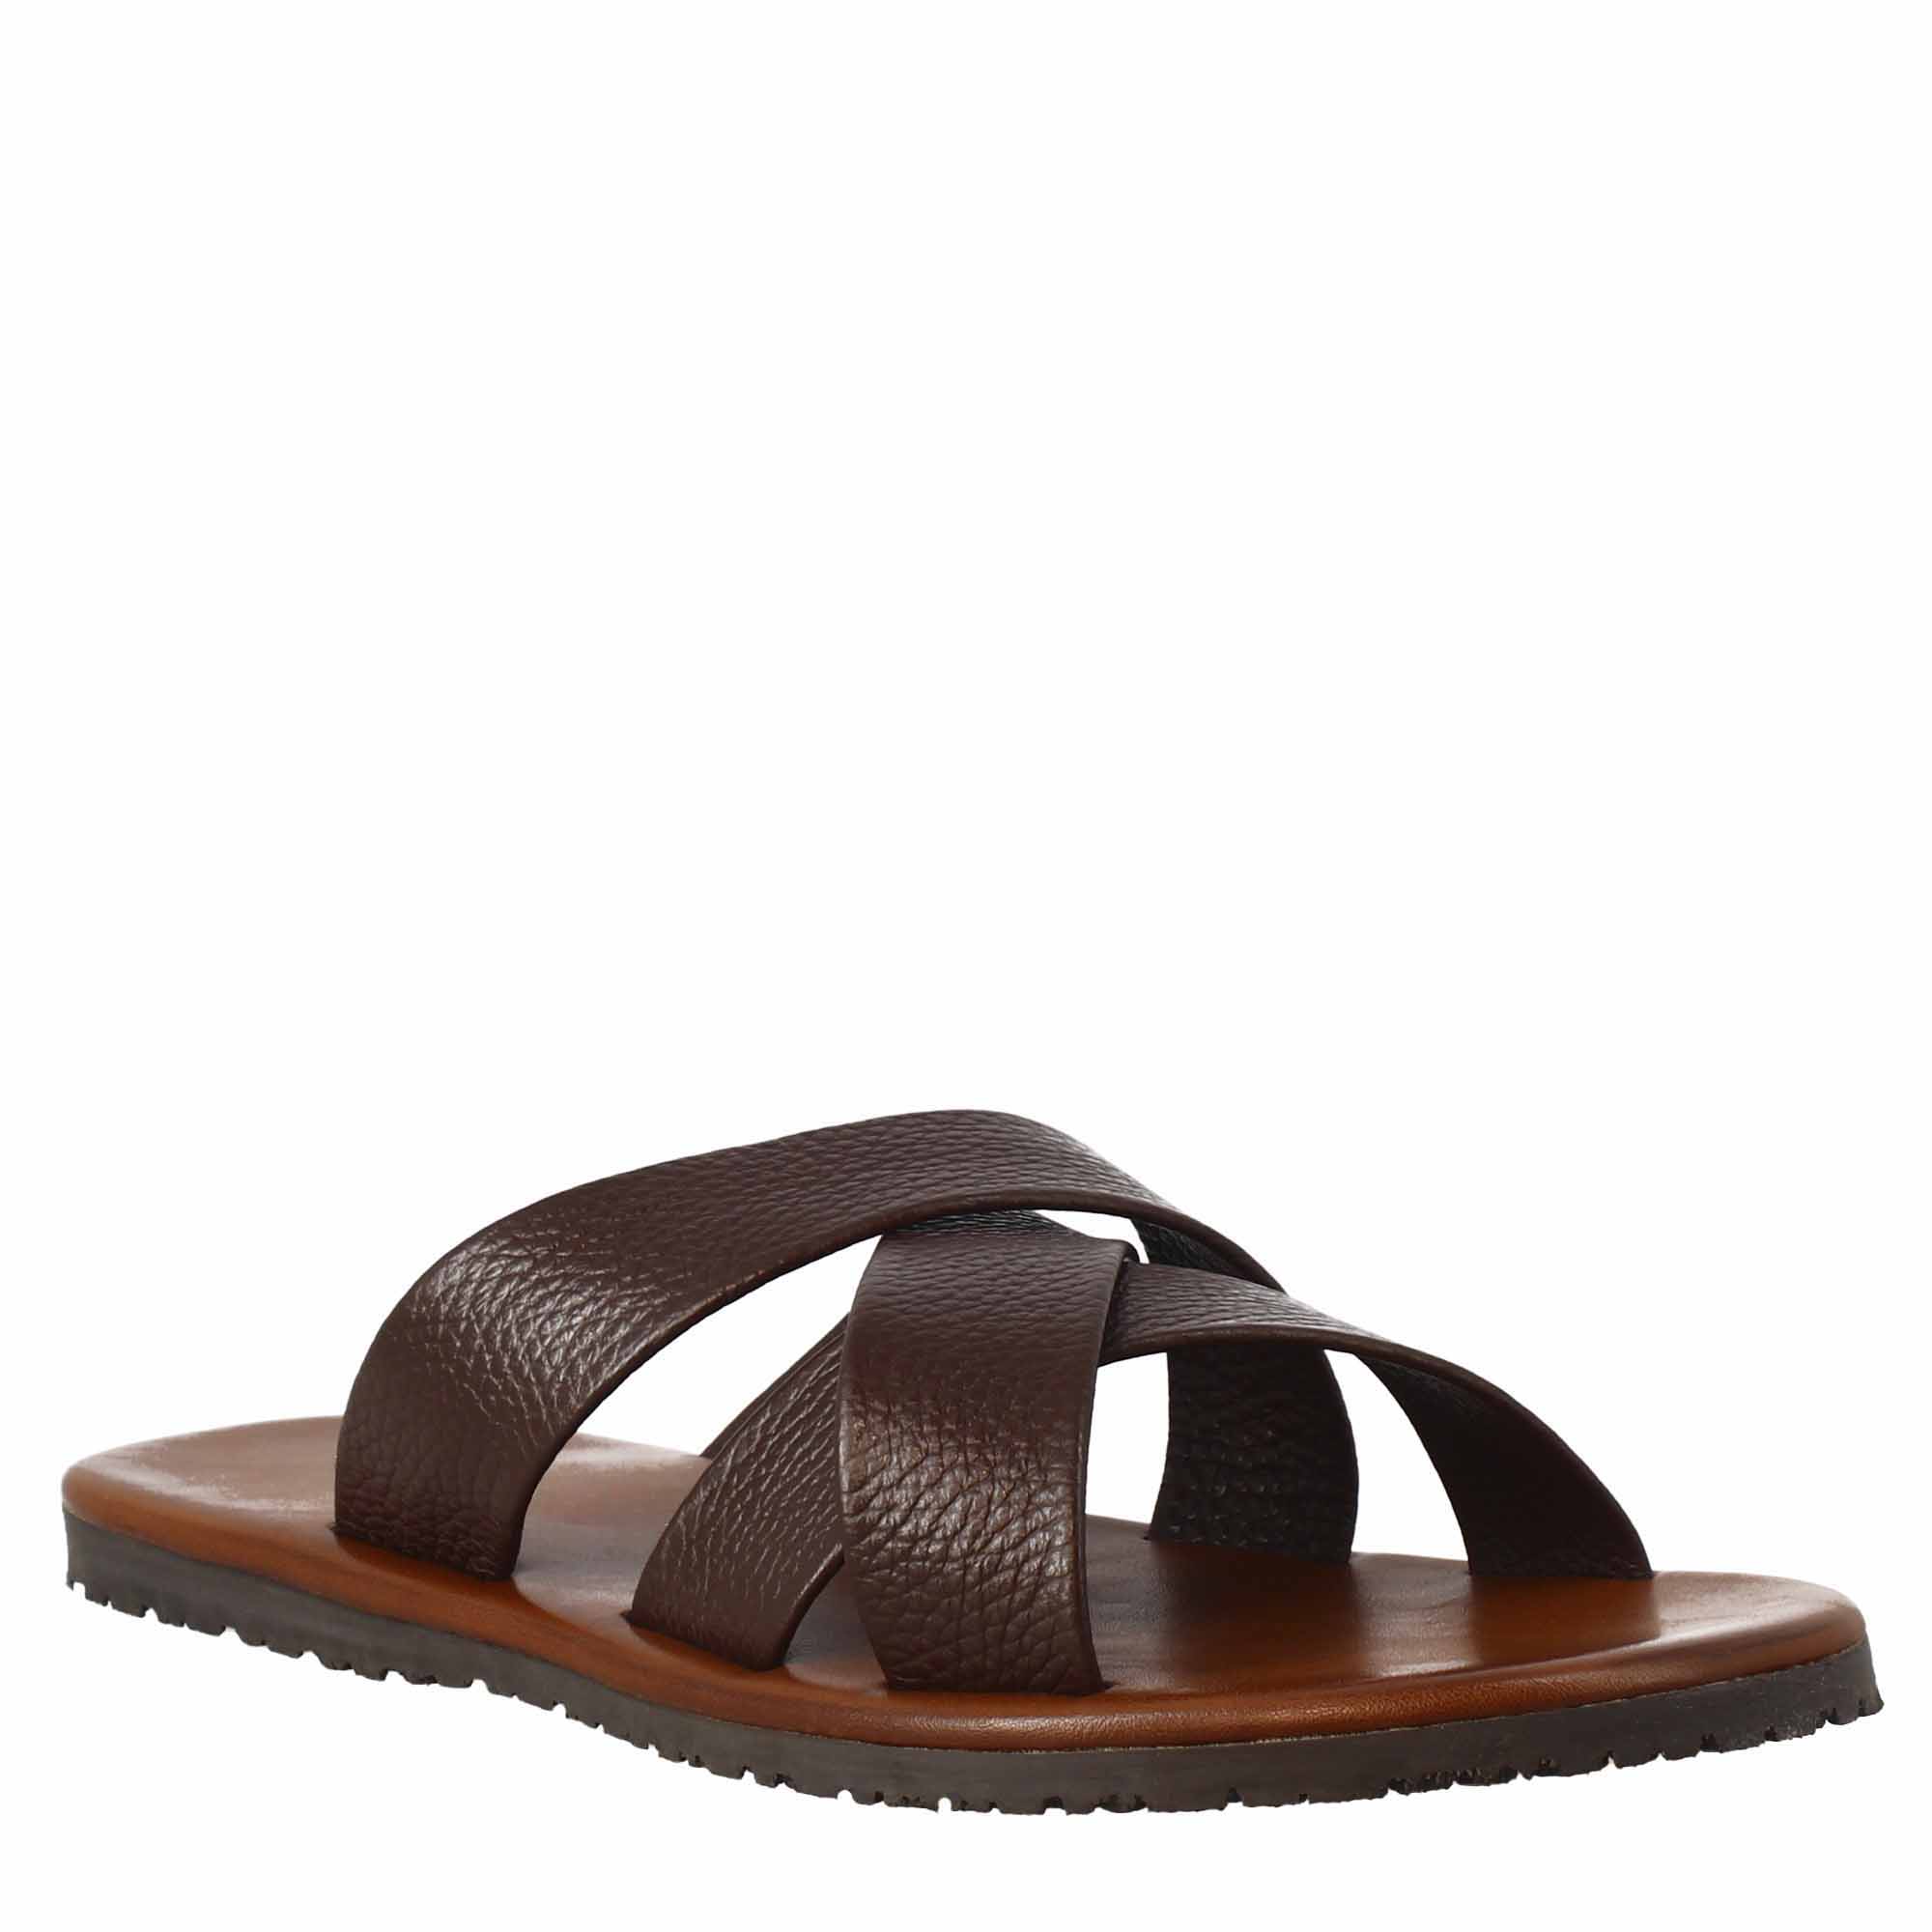 Brown Leather Slippers